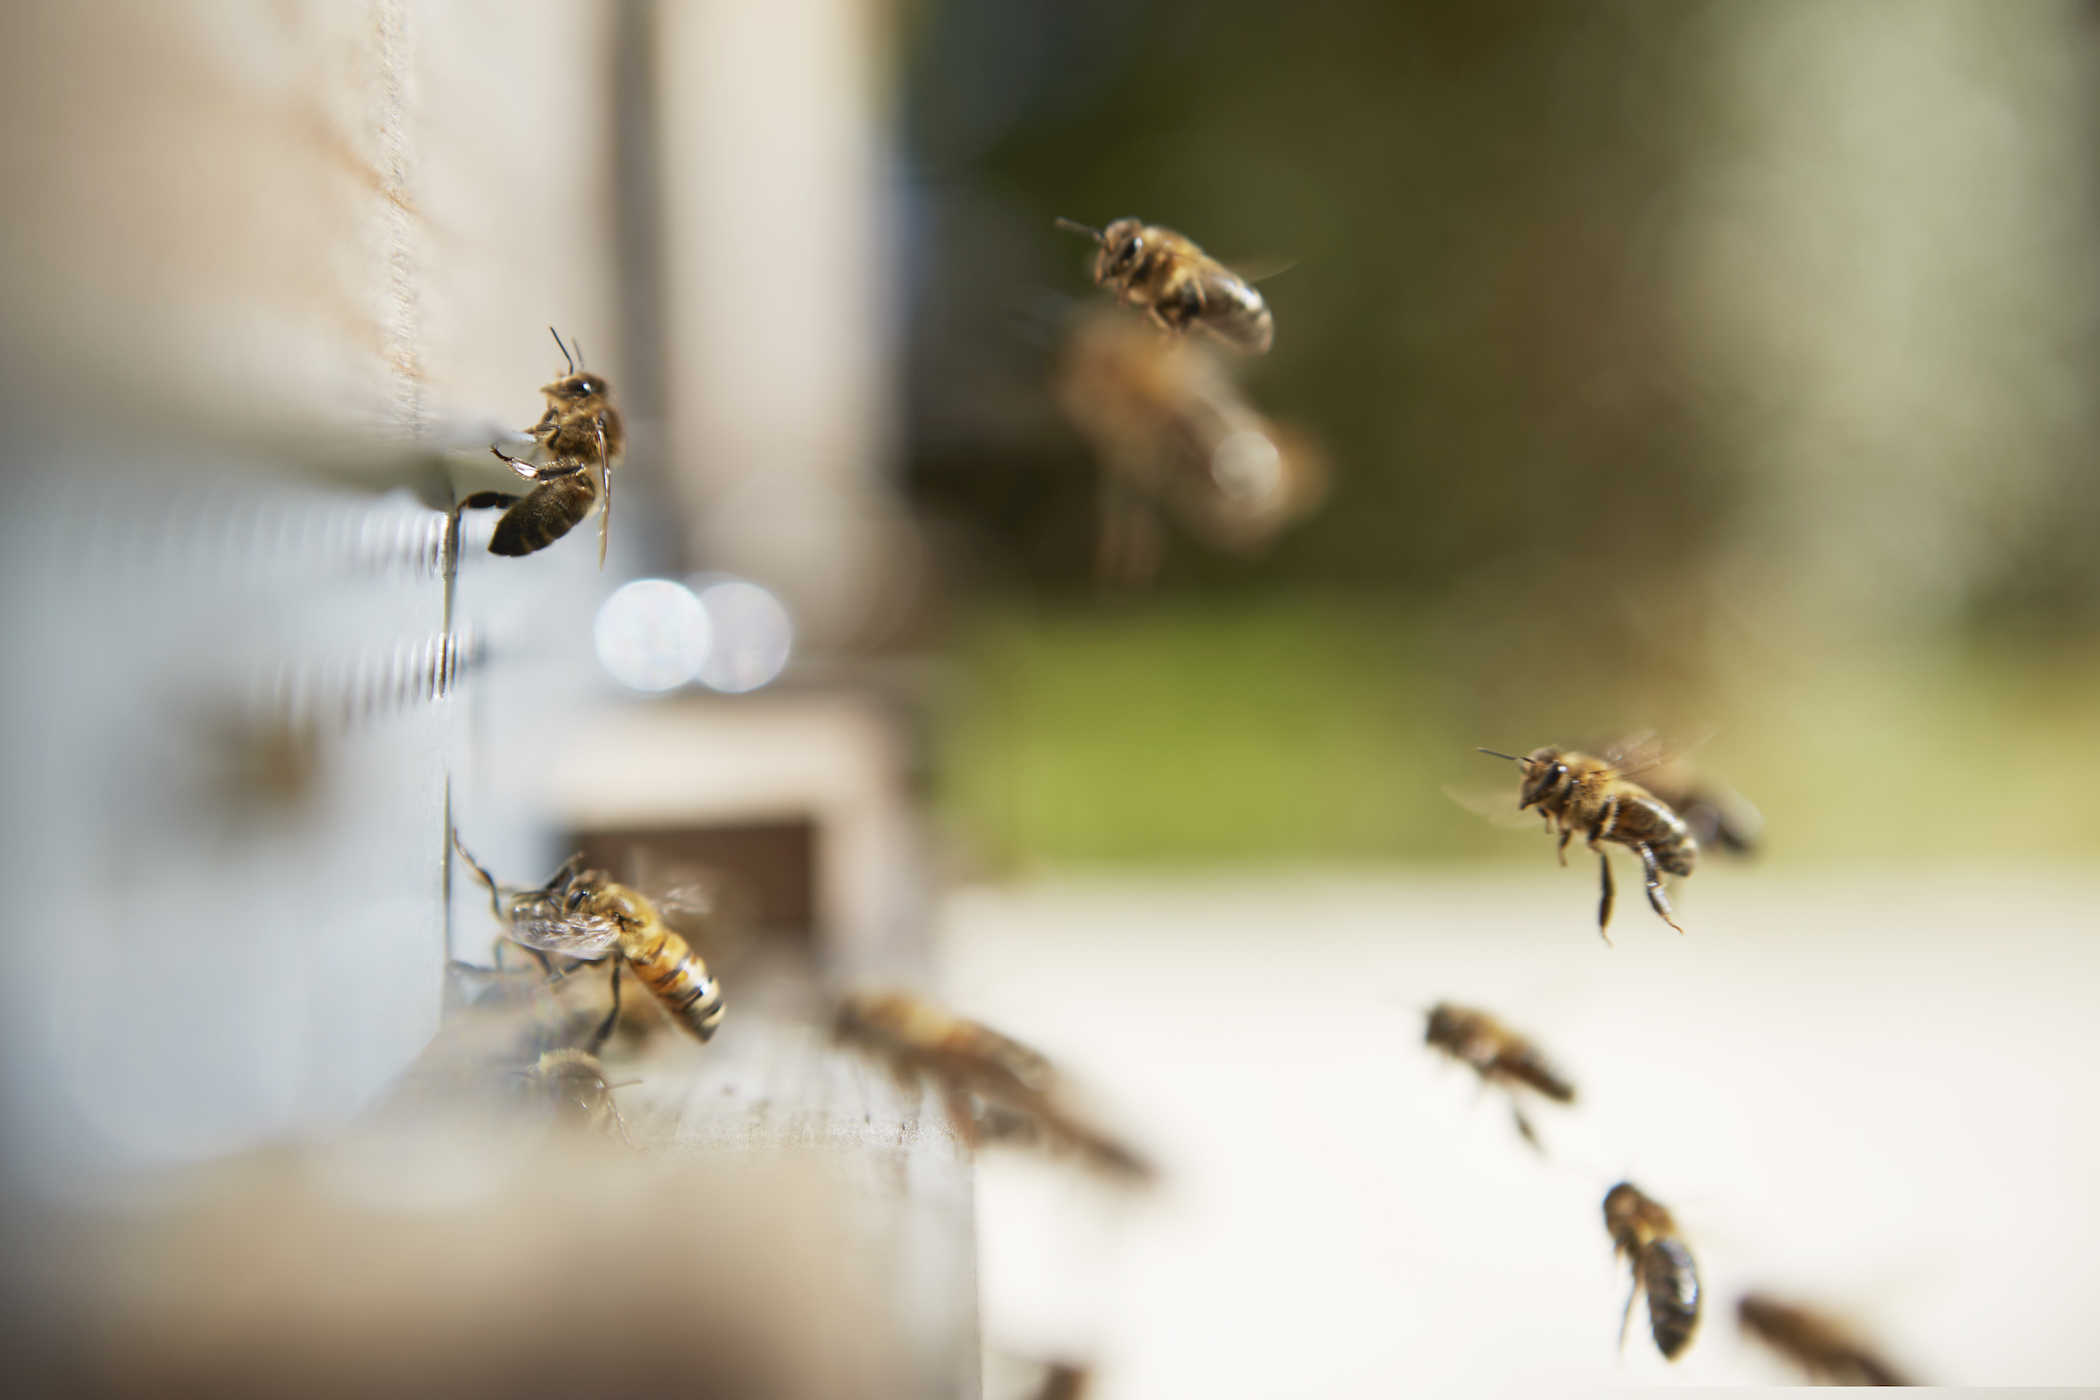 Bees ensure a healthy ecosystem photo@ladauphine